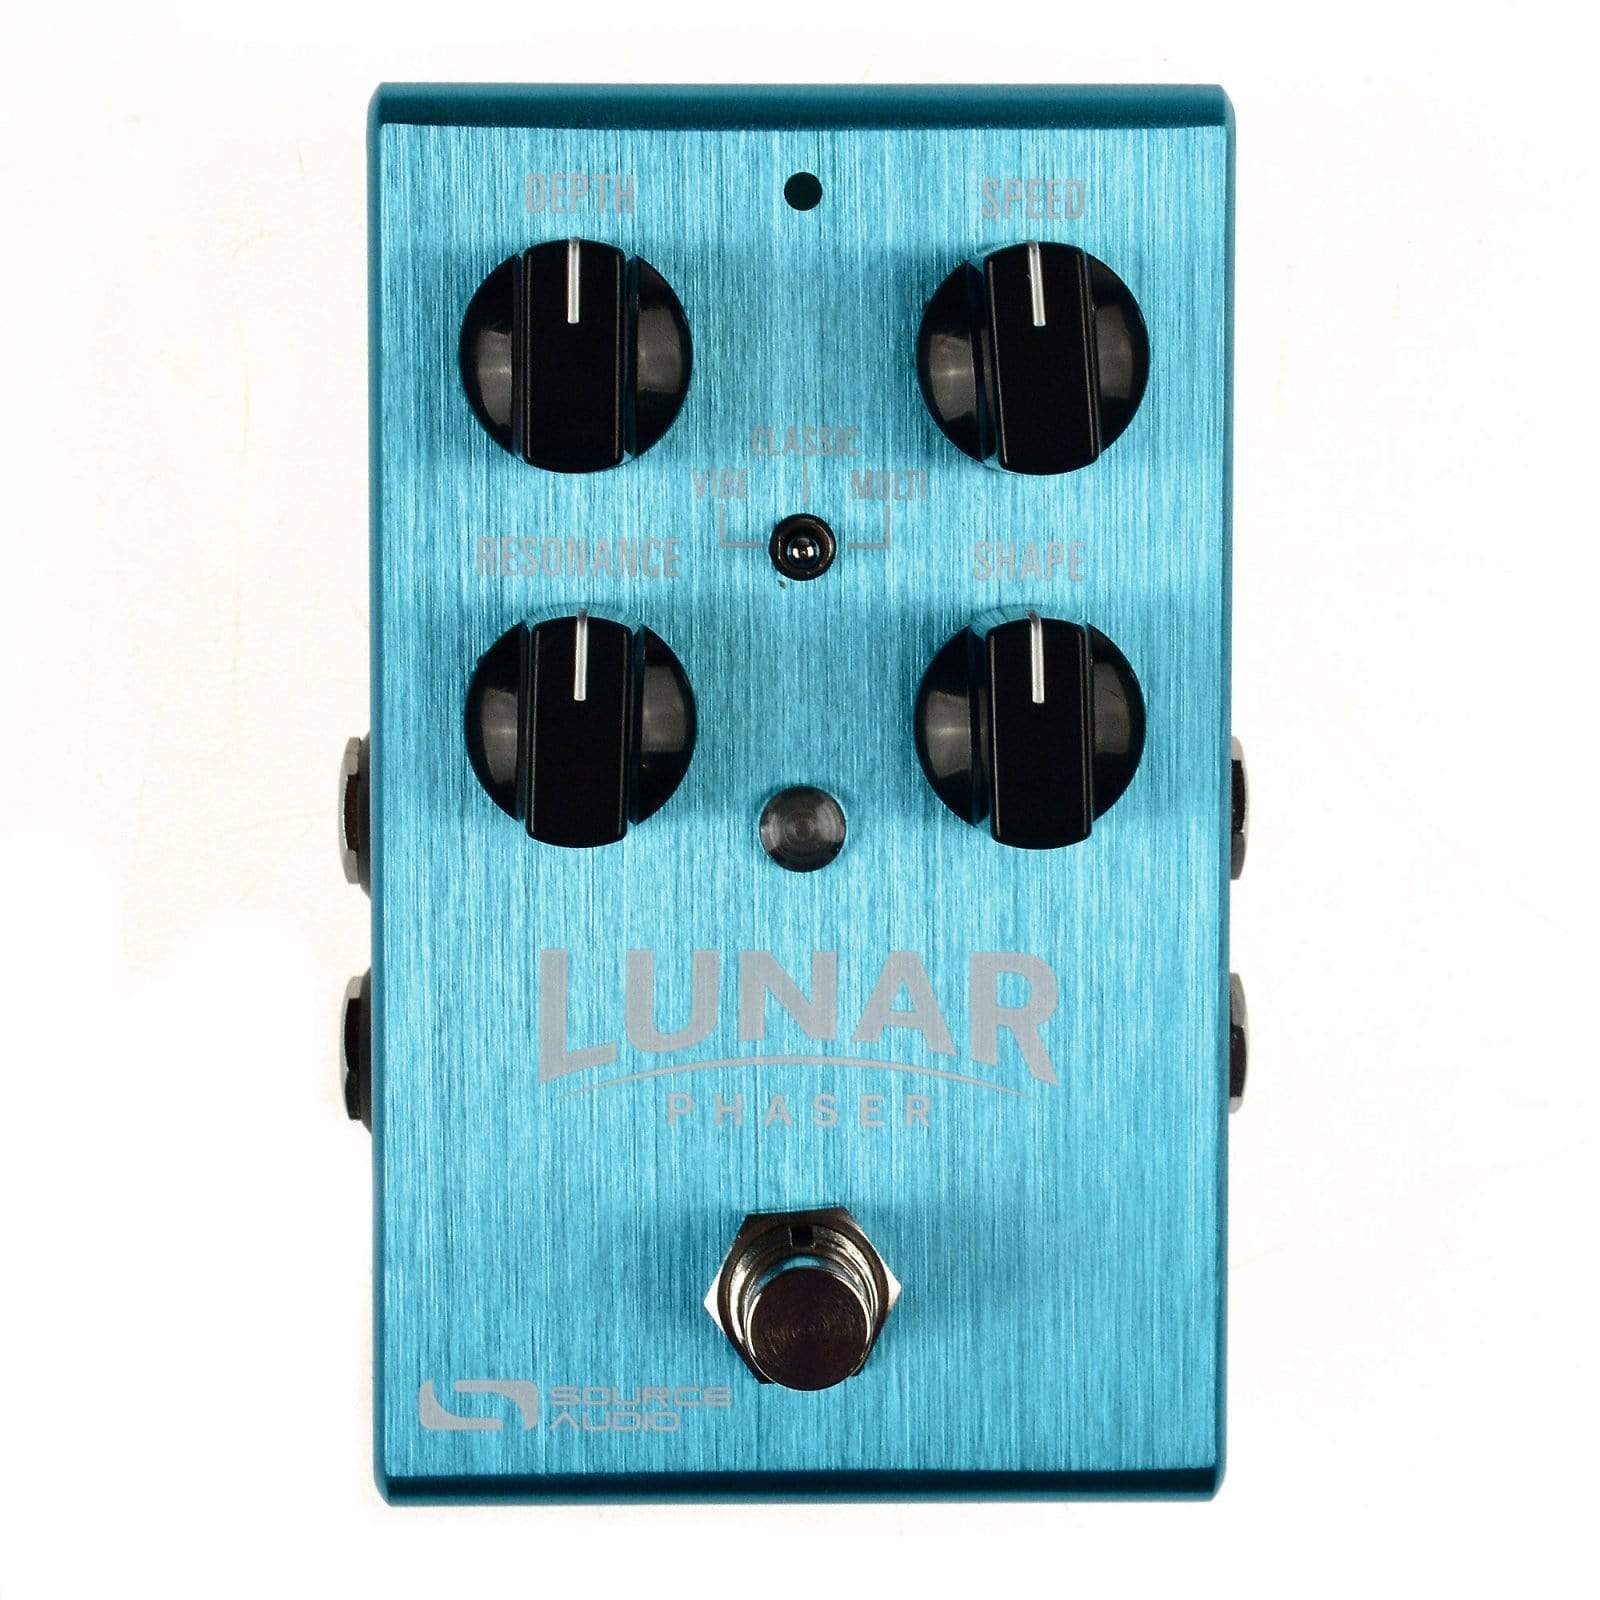 Source Audio One Series Lunar Phaser Effects and Pedals / Phase Shifters